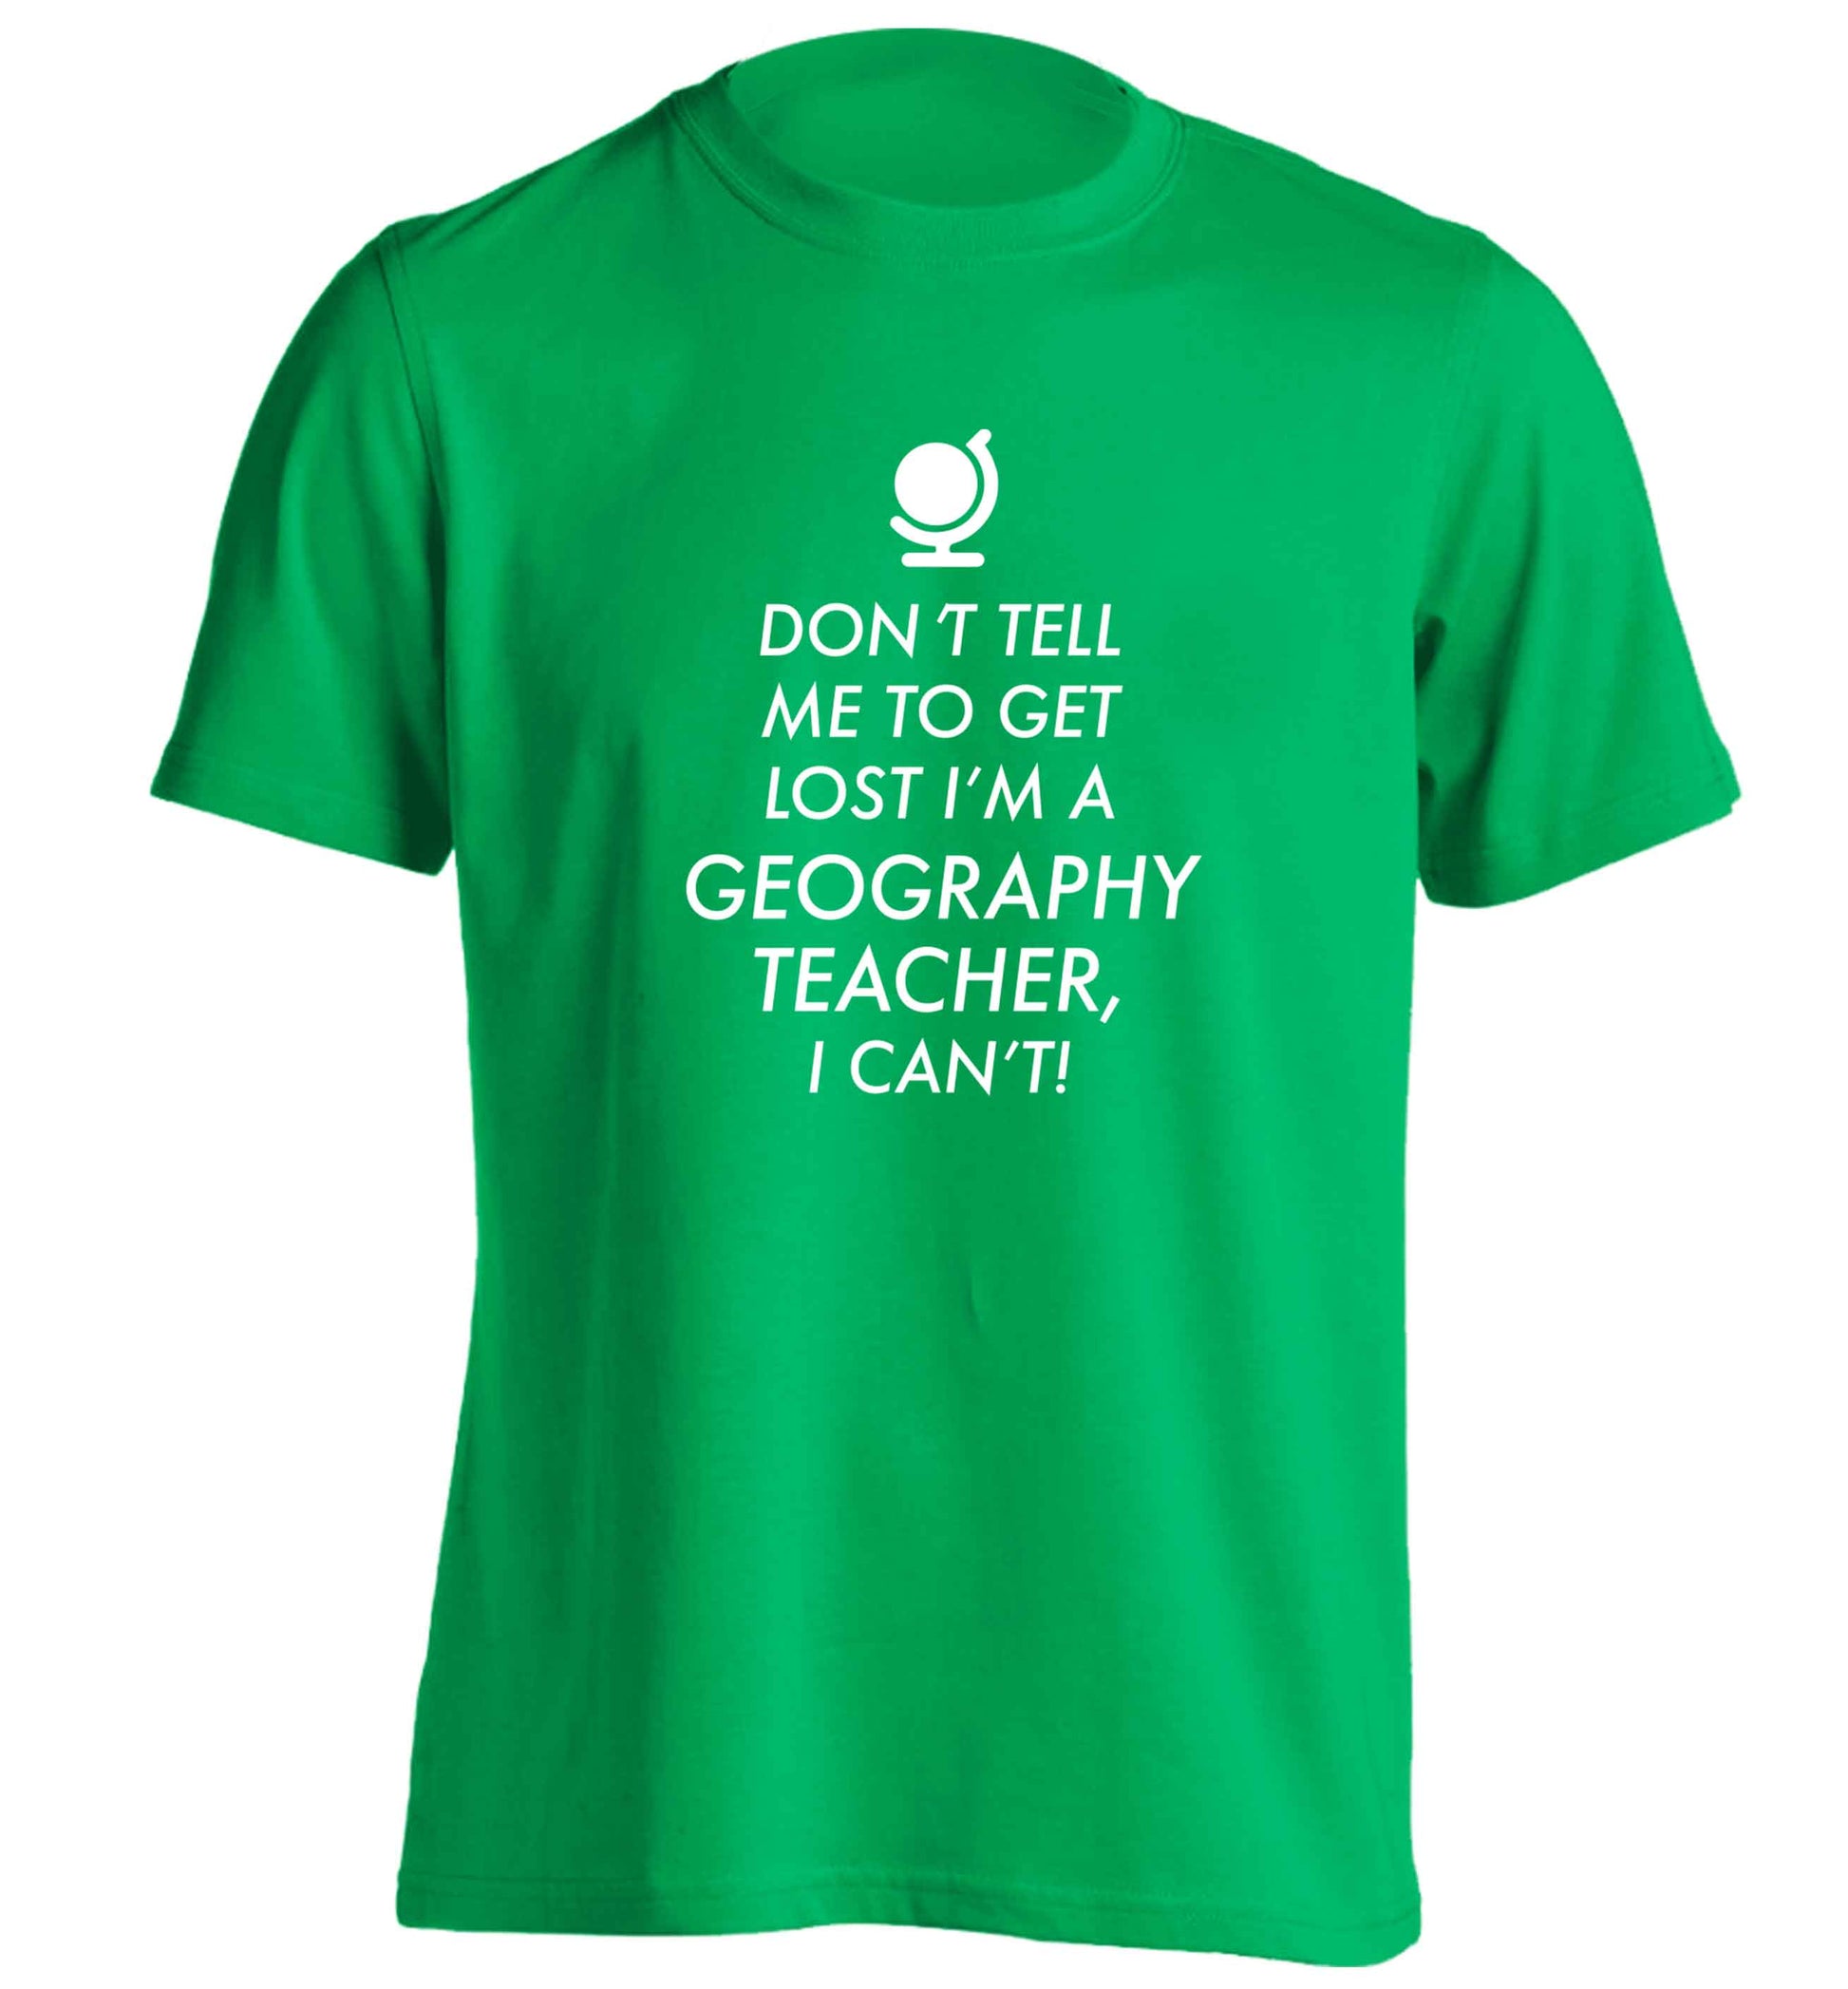 Don't tell me to get lost I'm a geography teacher, I can't adults unisex green Tshirt 2XL